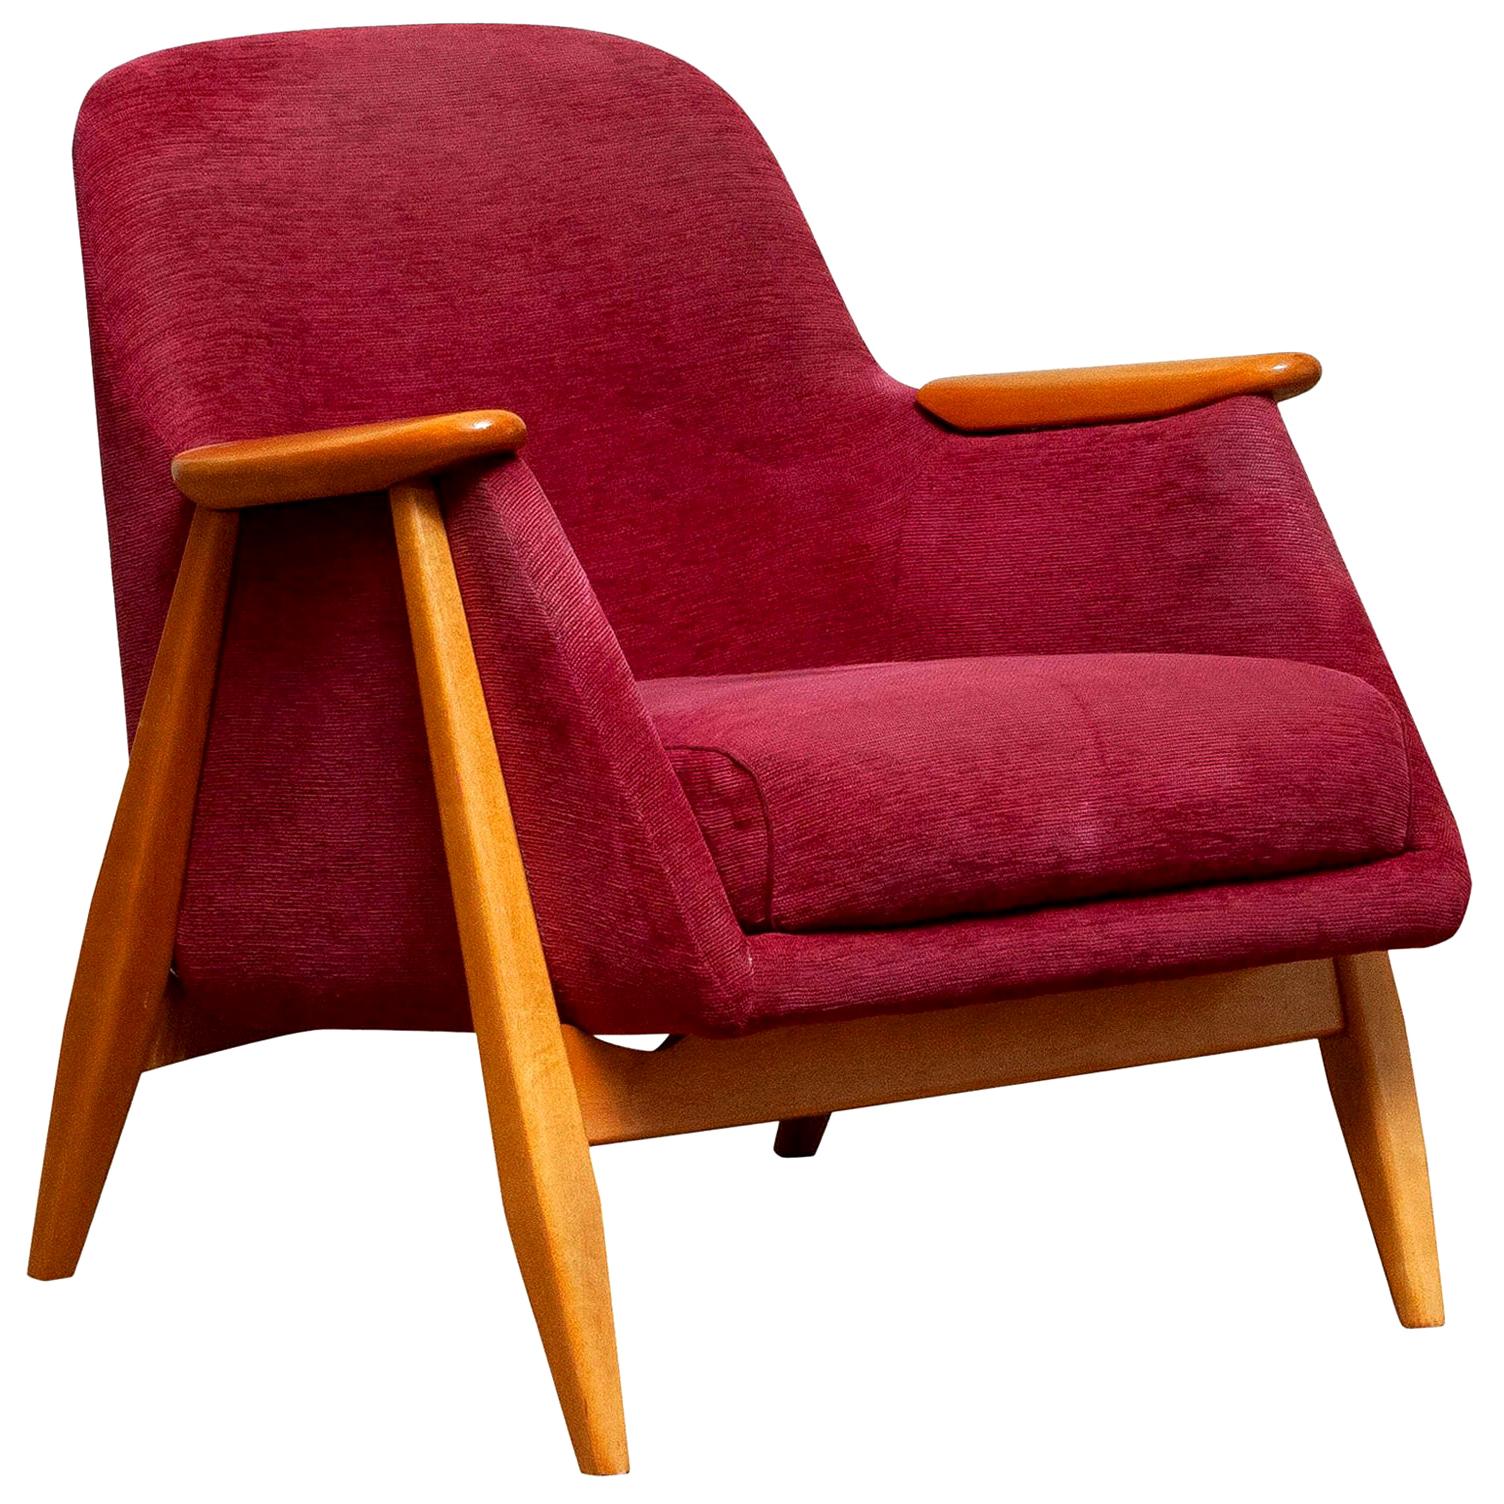 Very nice arm or easy chair designed by Svante Skogh for Asko, Finland.
This chair is made of beech and original dark pink chenille/baby-roy fabric.
It is in a good condition.
Period: 1950s
Dimensions: H 75 cm, W 70 cm, D 66 cm.